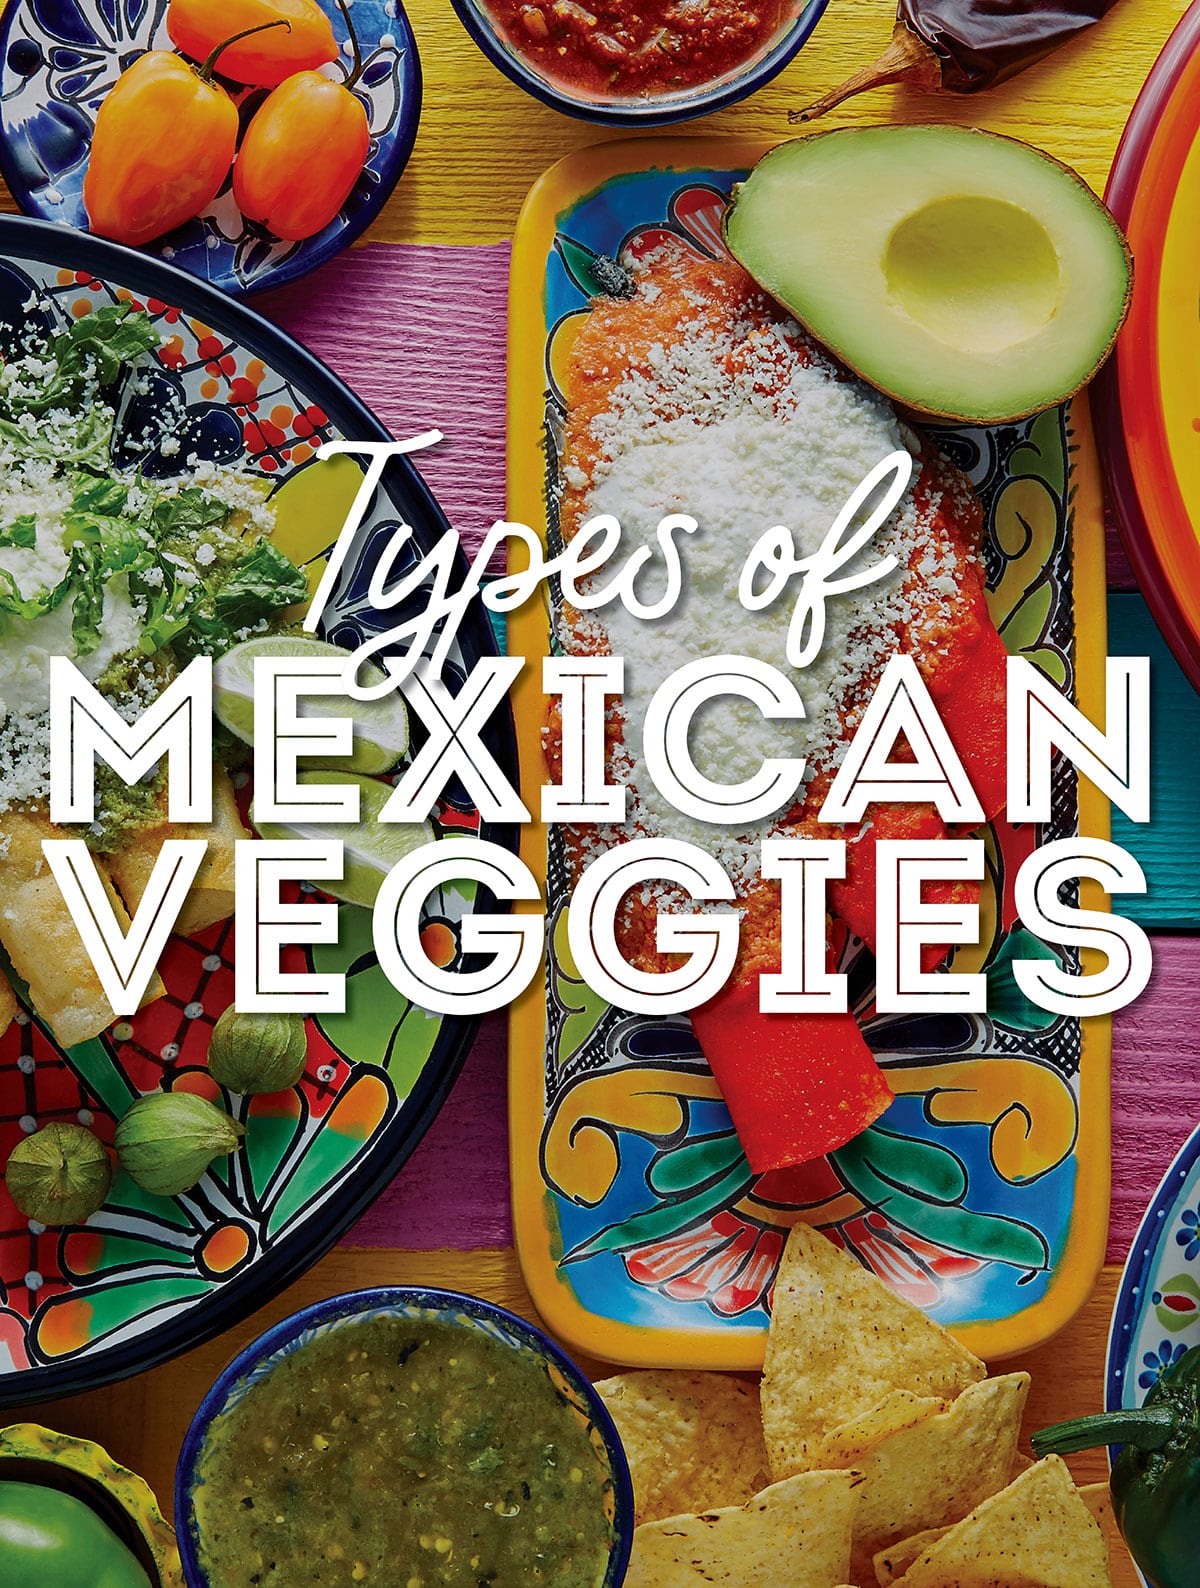 Collage that says "types of Mexican vegetables".